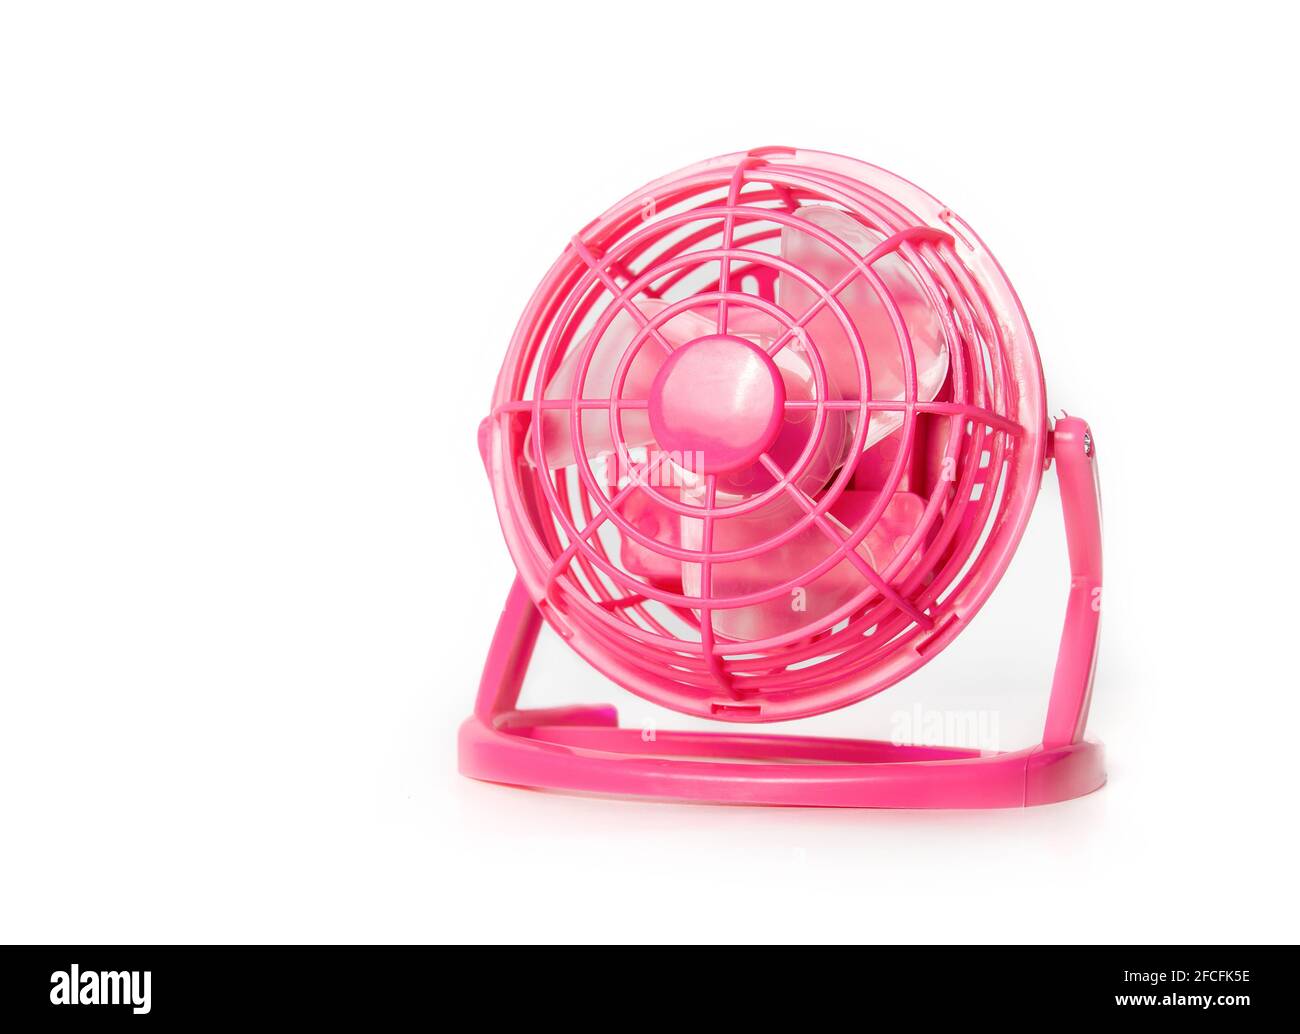 Mini fan. Portable battery operated hot pink small table